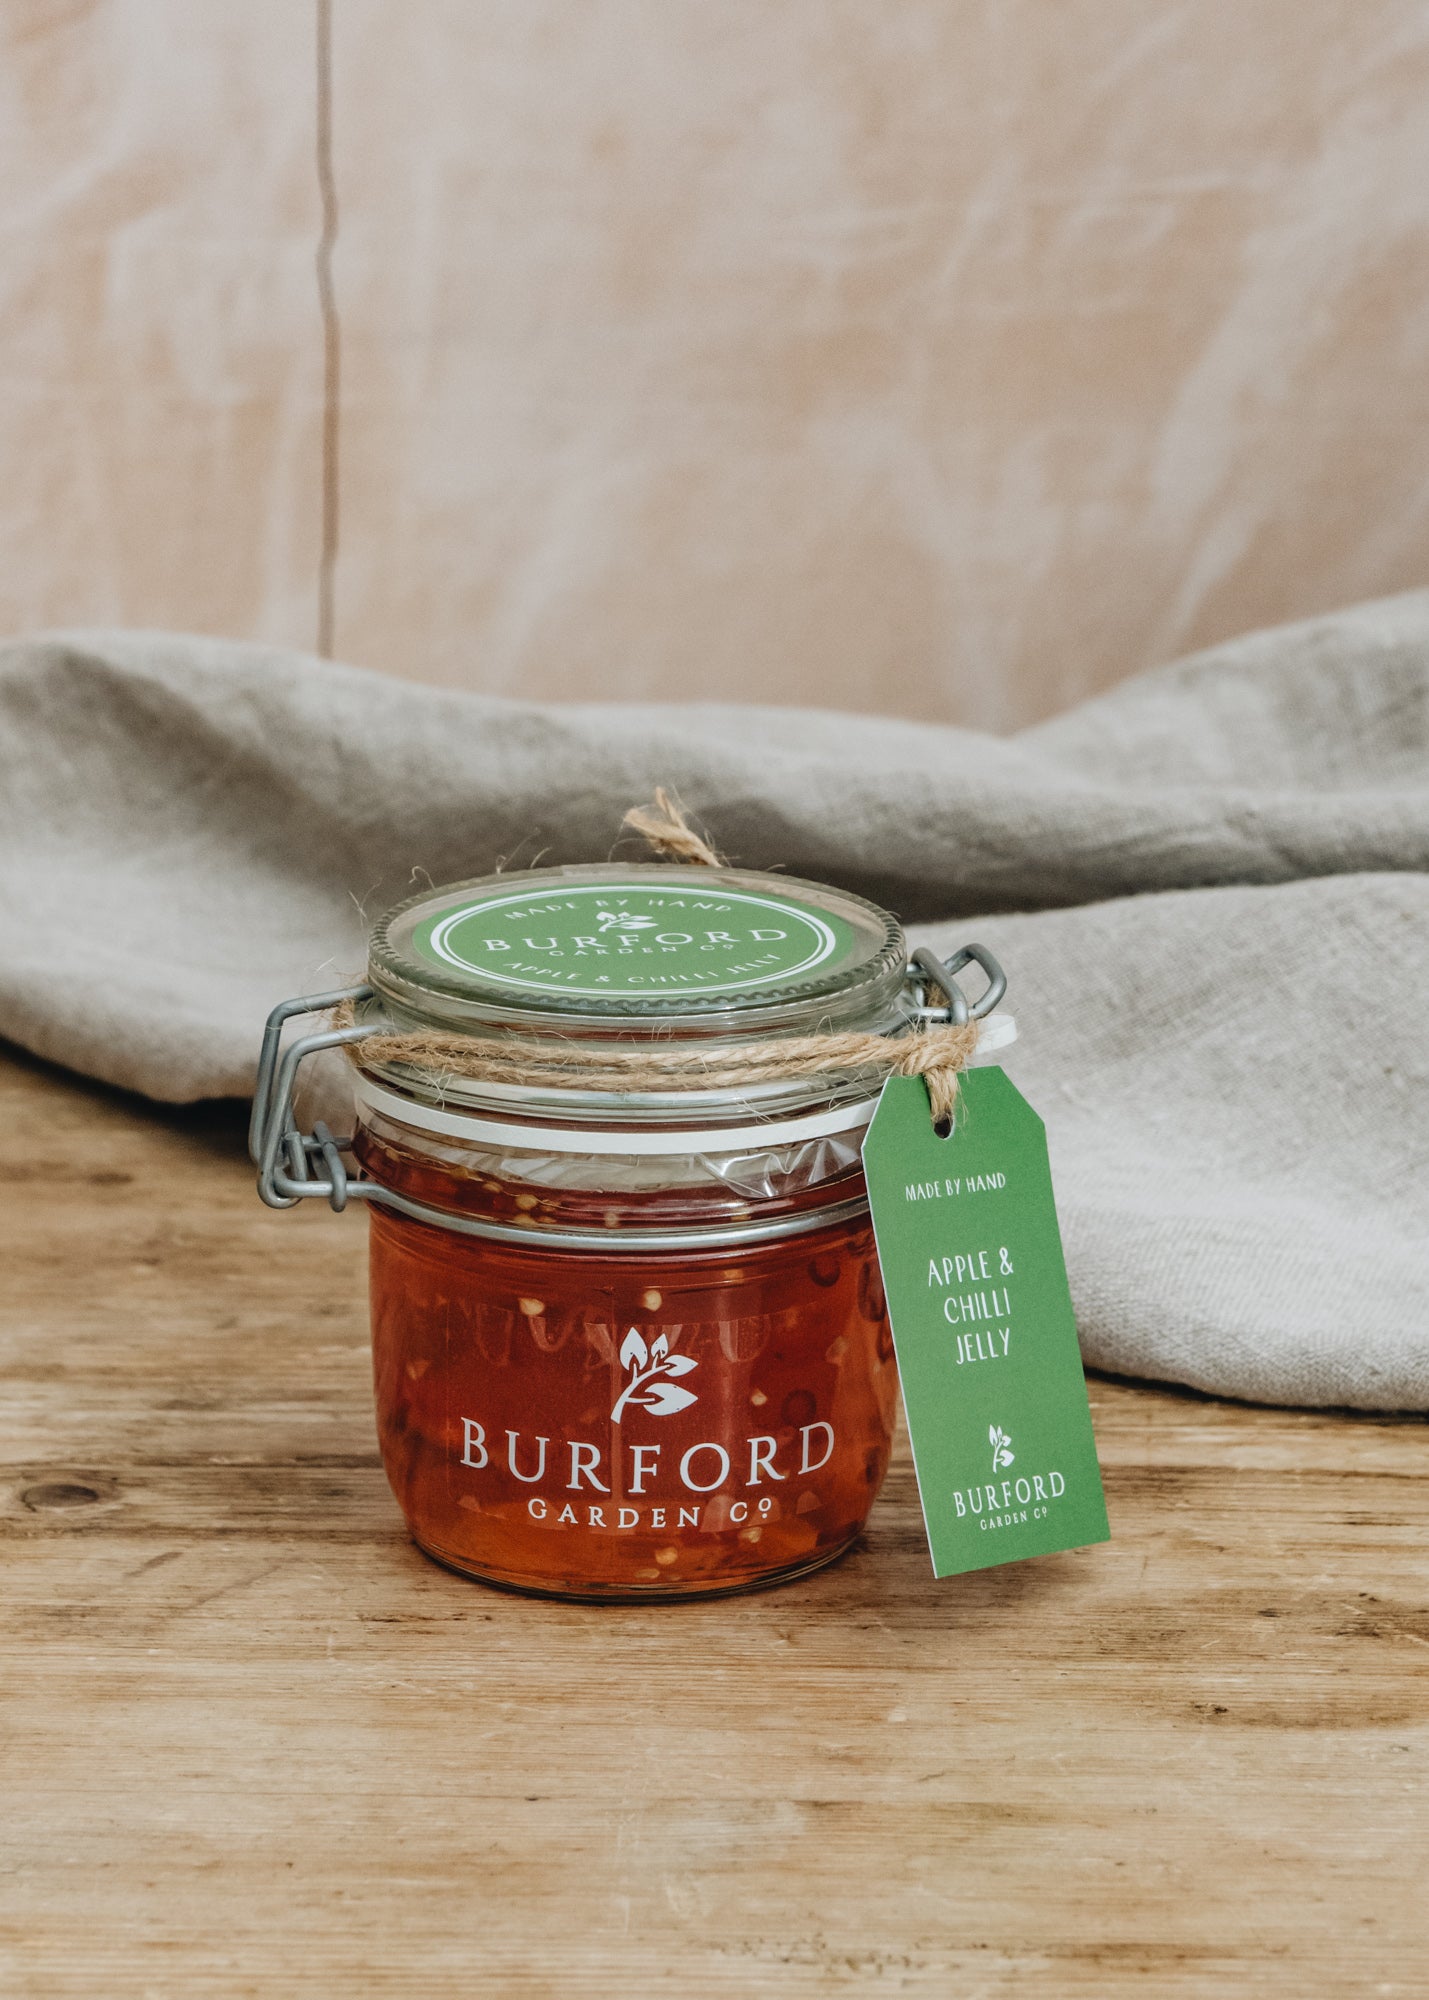 Burford Apple and Chilli Jelly